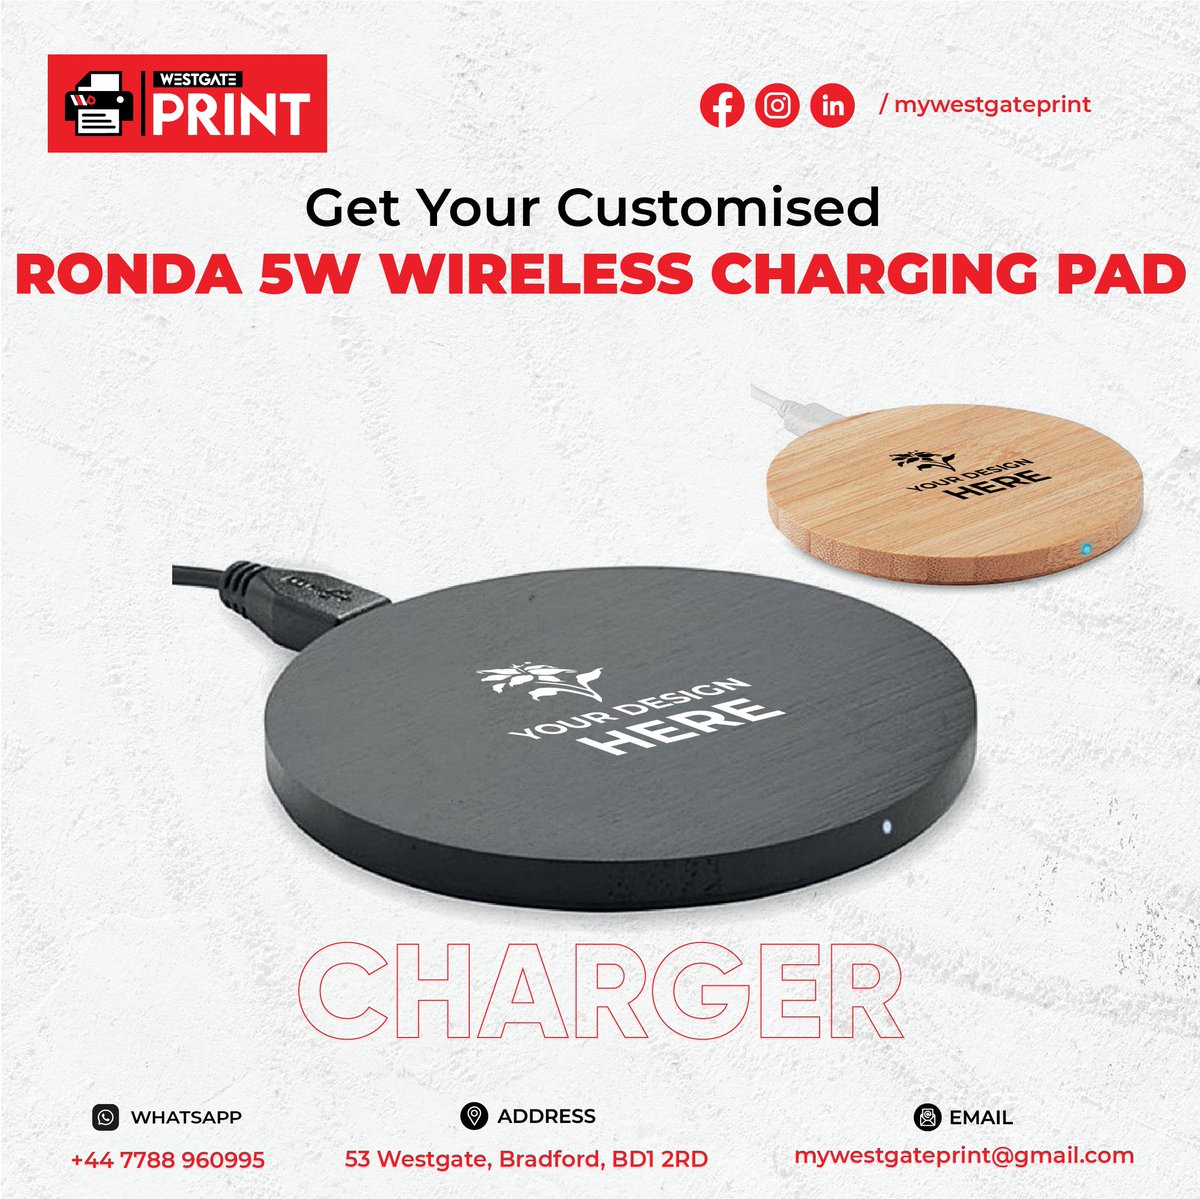 Order now for a clutter-free charging experience!

#CustomChargingPad #WirelessCharging #ConvenientCharging #OrderNow #mailboxesetc #westgateprint_BradFord #uk #Real_WestgatePrintBradford #best_westgateprint_bradford #FastPrint_Bradford